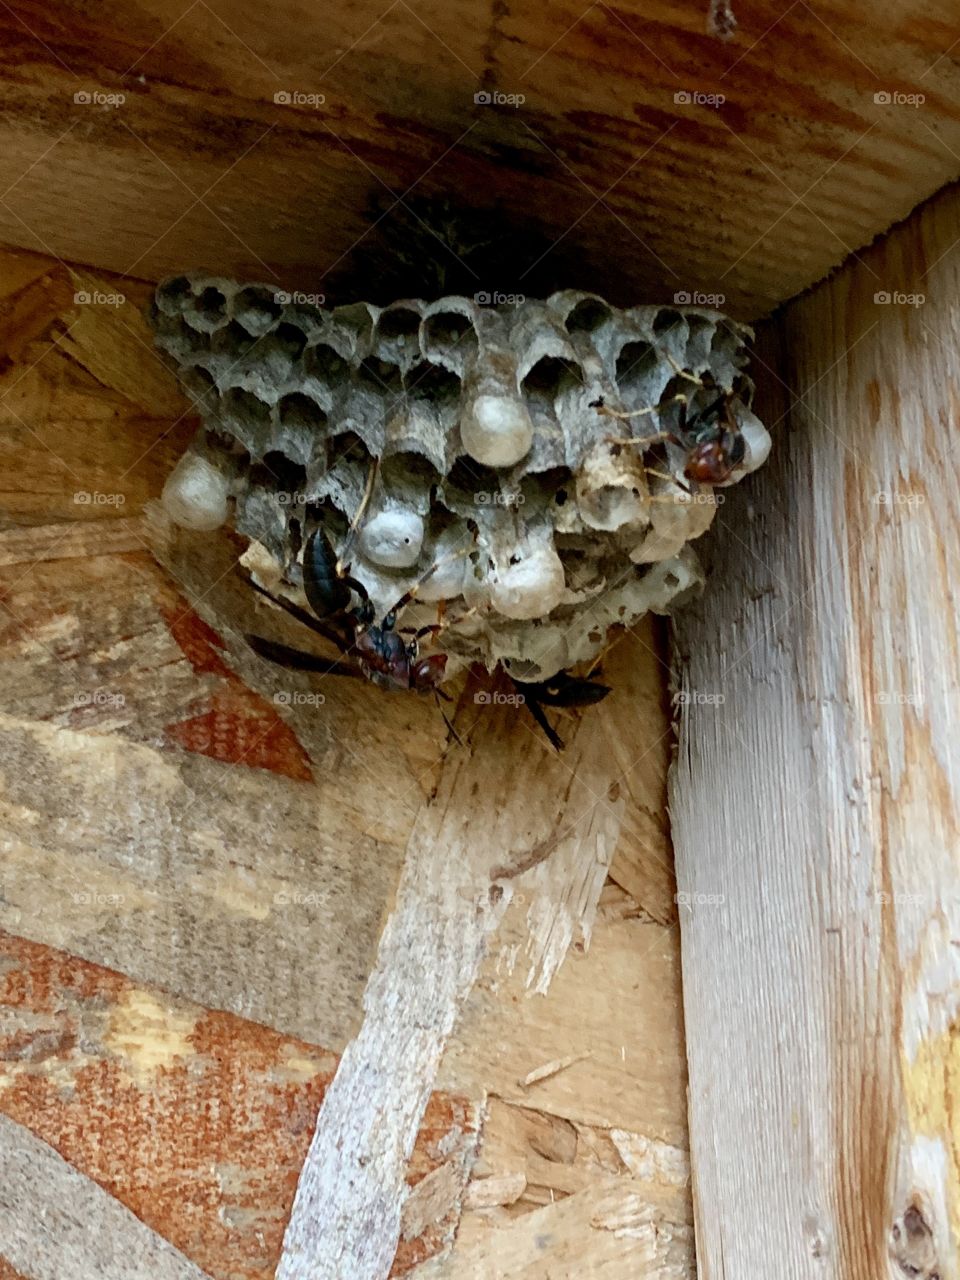 Wasps and nest in the corner of a wooden structure